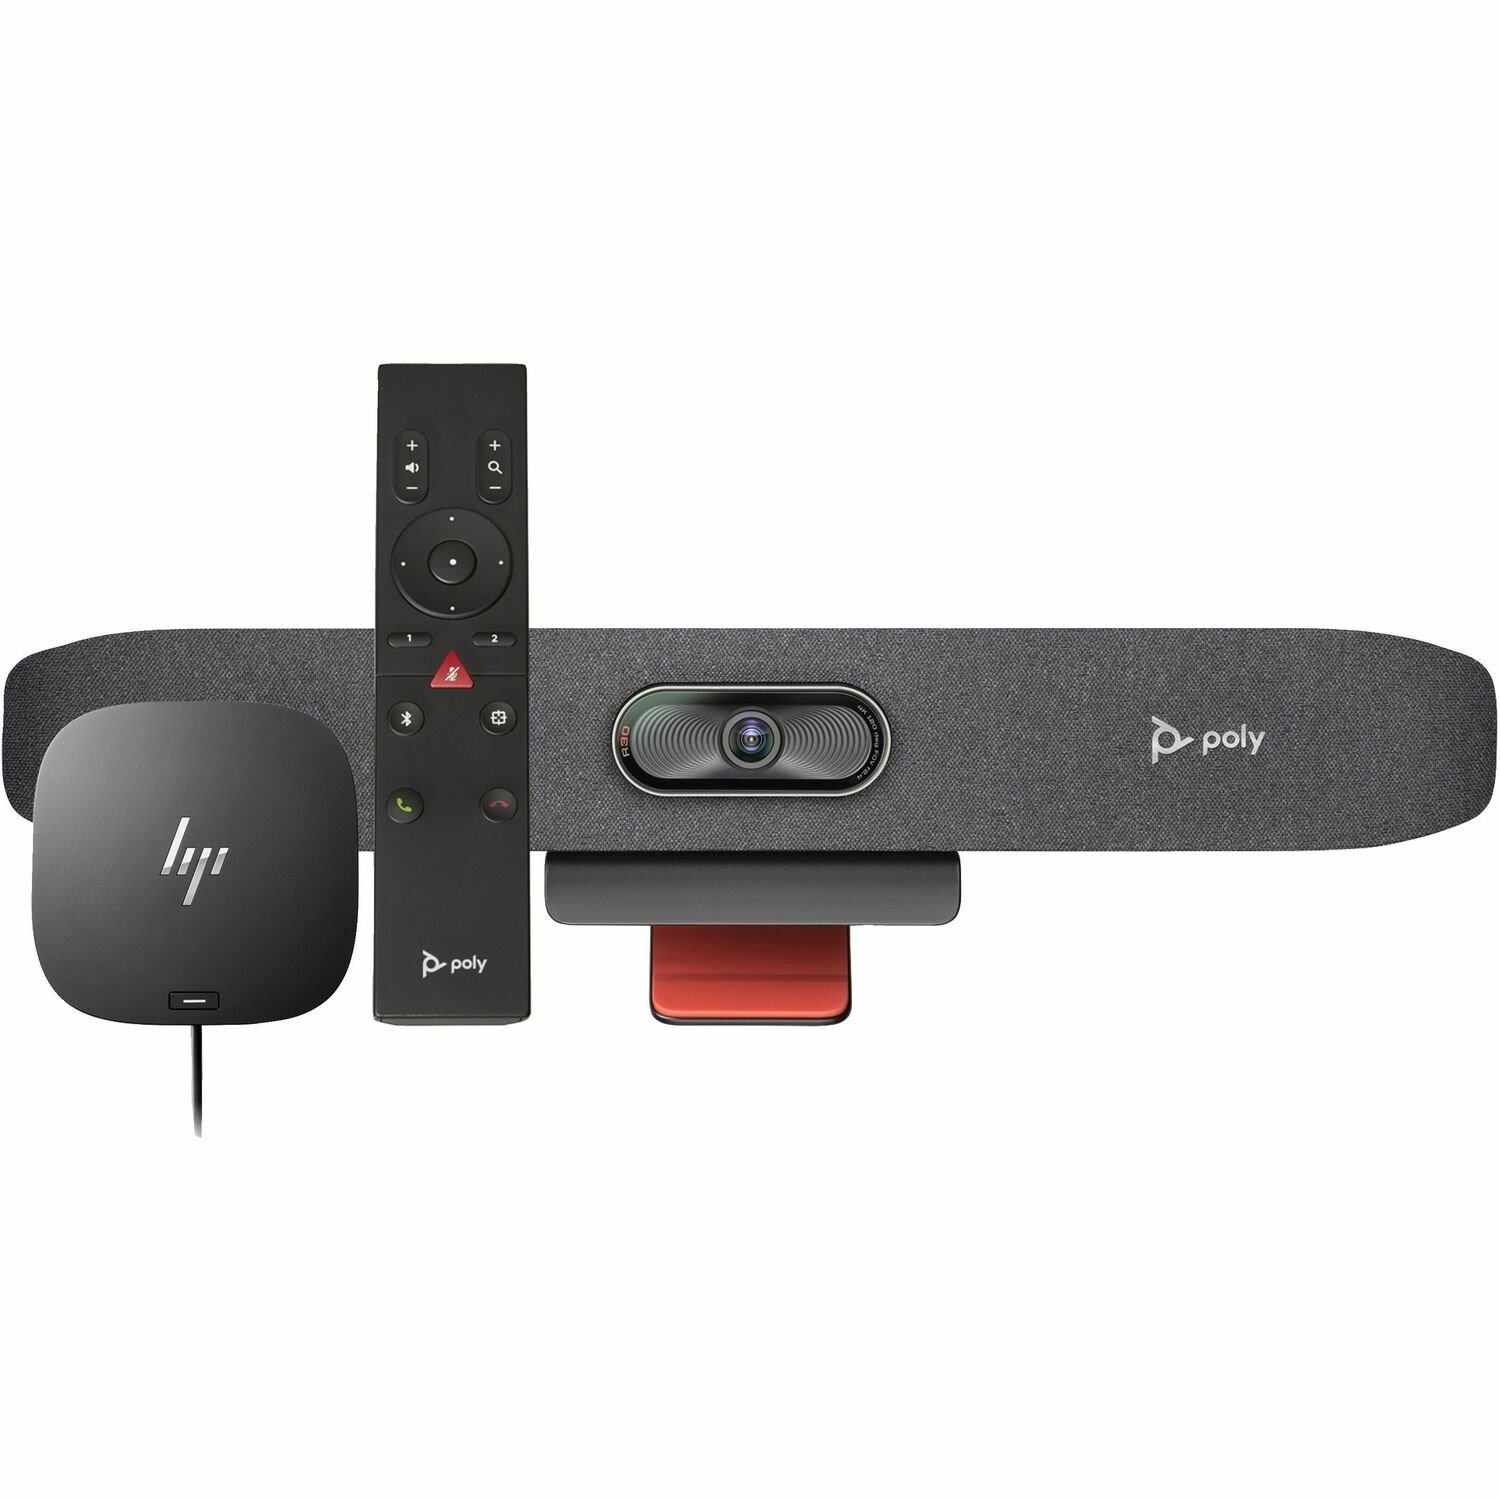 Poly Studio R30 USB Video Bar and BT Remote with USB-C Dock G5 (ABG)